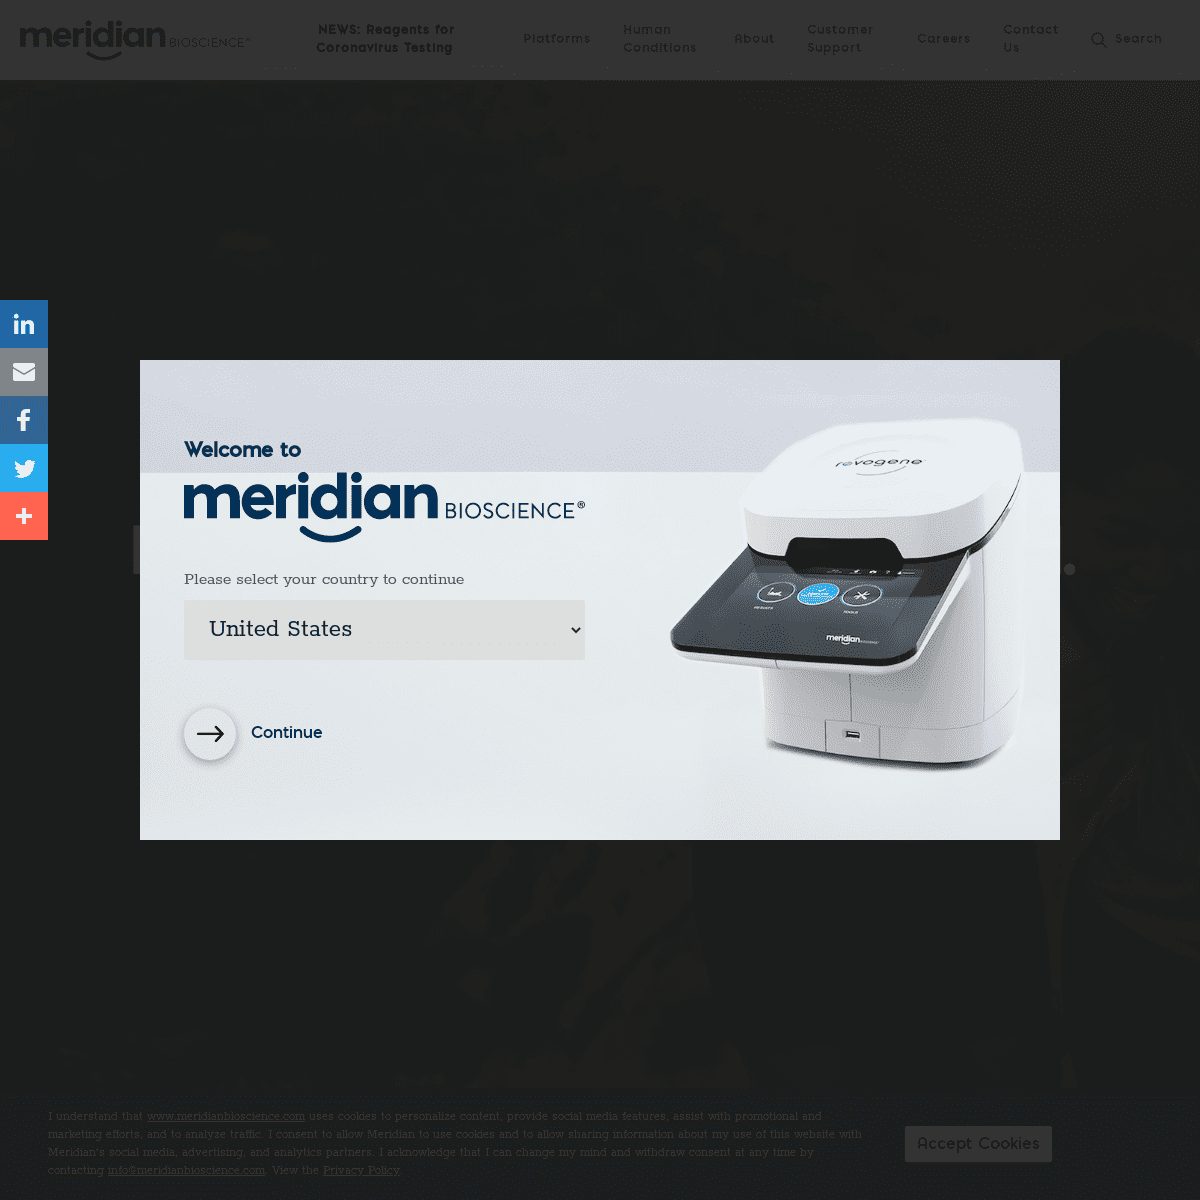 A complete backup of https://meridianbioscience.com